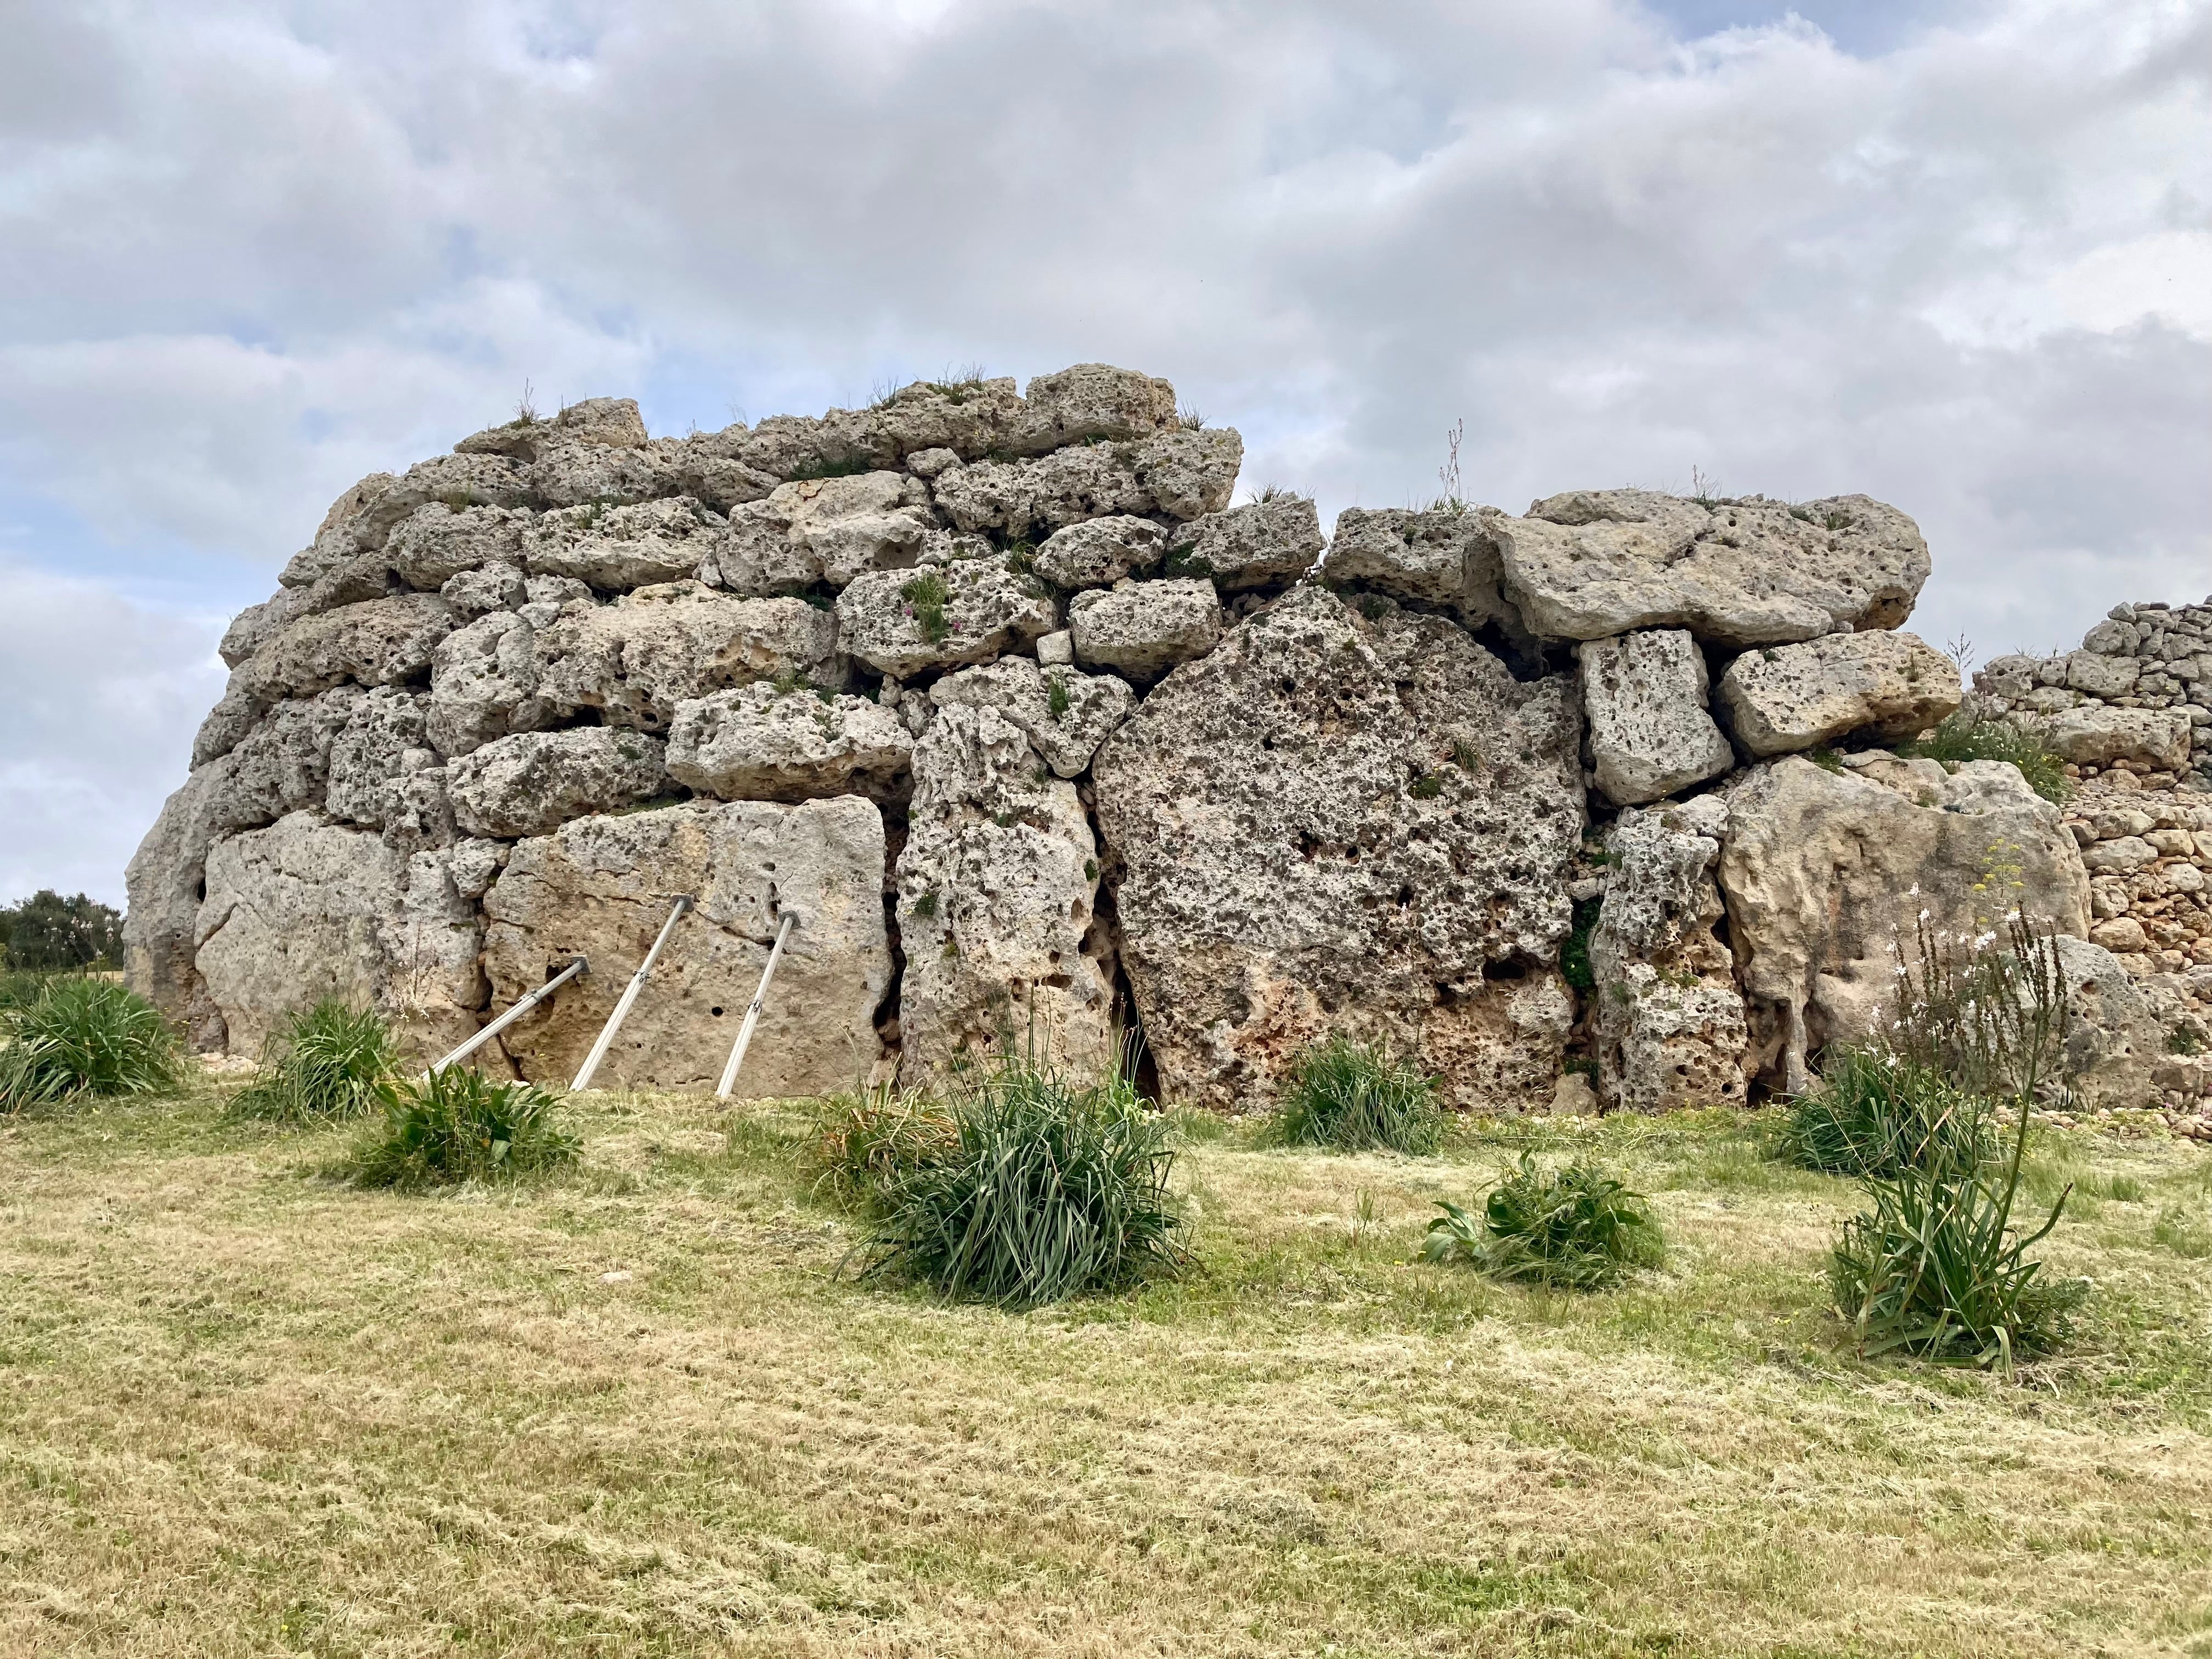 The Neolithic Ġgantija Temples are older than the pyramids